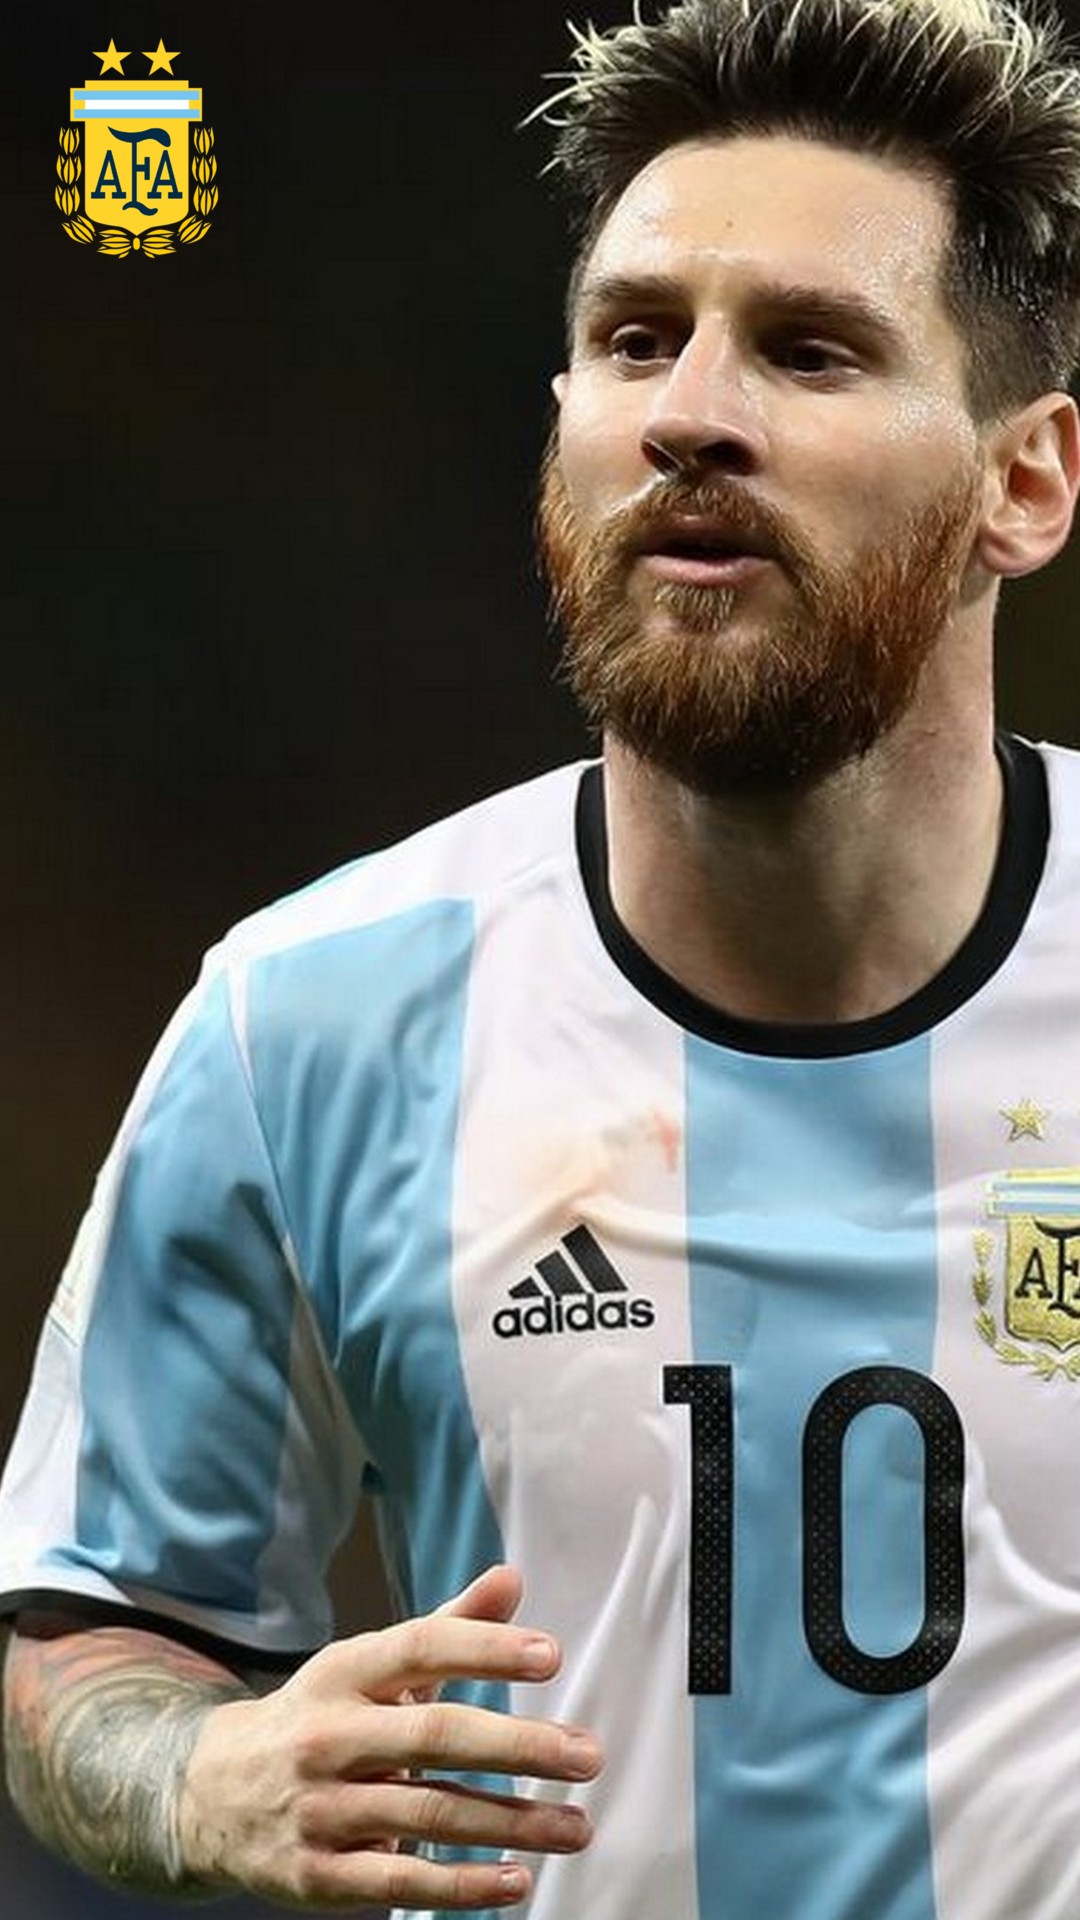 Android Wallpaper Messi Argentina with image resolution 1080x1920 pixel. You can make this wallpaper for your Android backgrounds, Tablet, Smartphones Screensavers and Mobile Phone Lock Screen